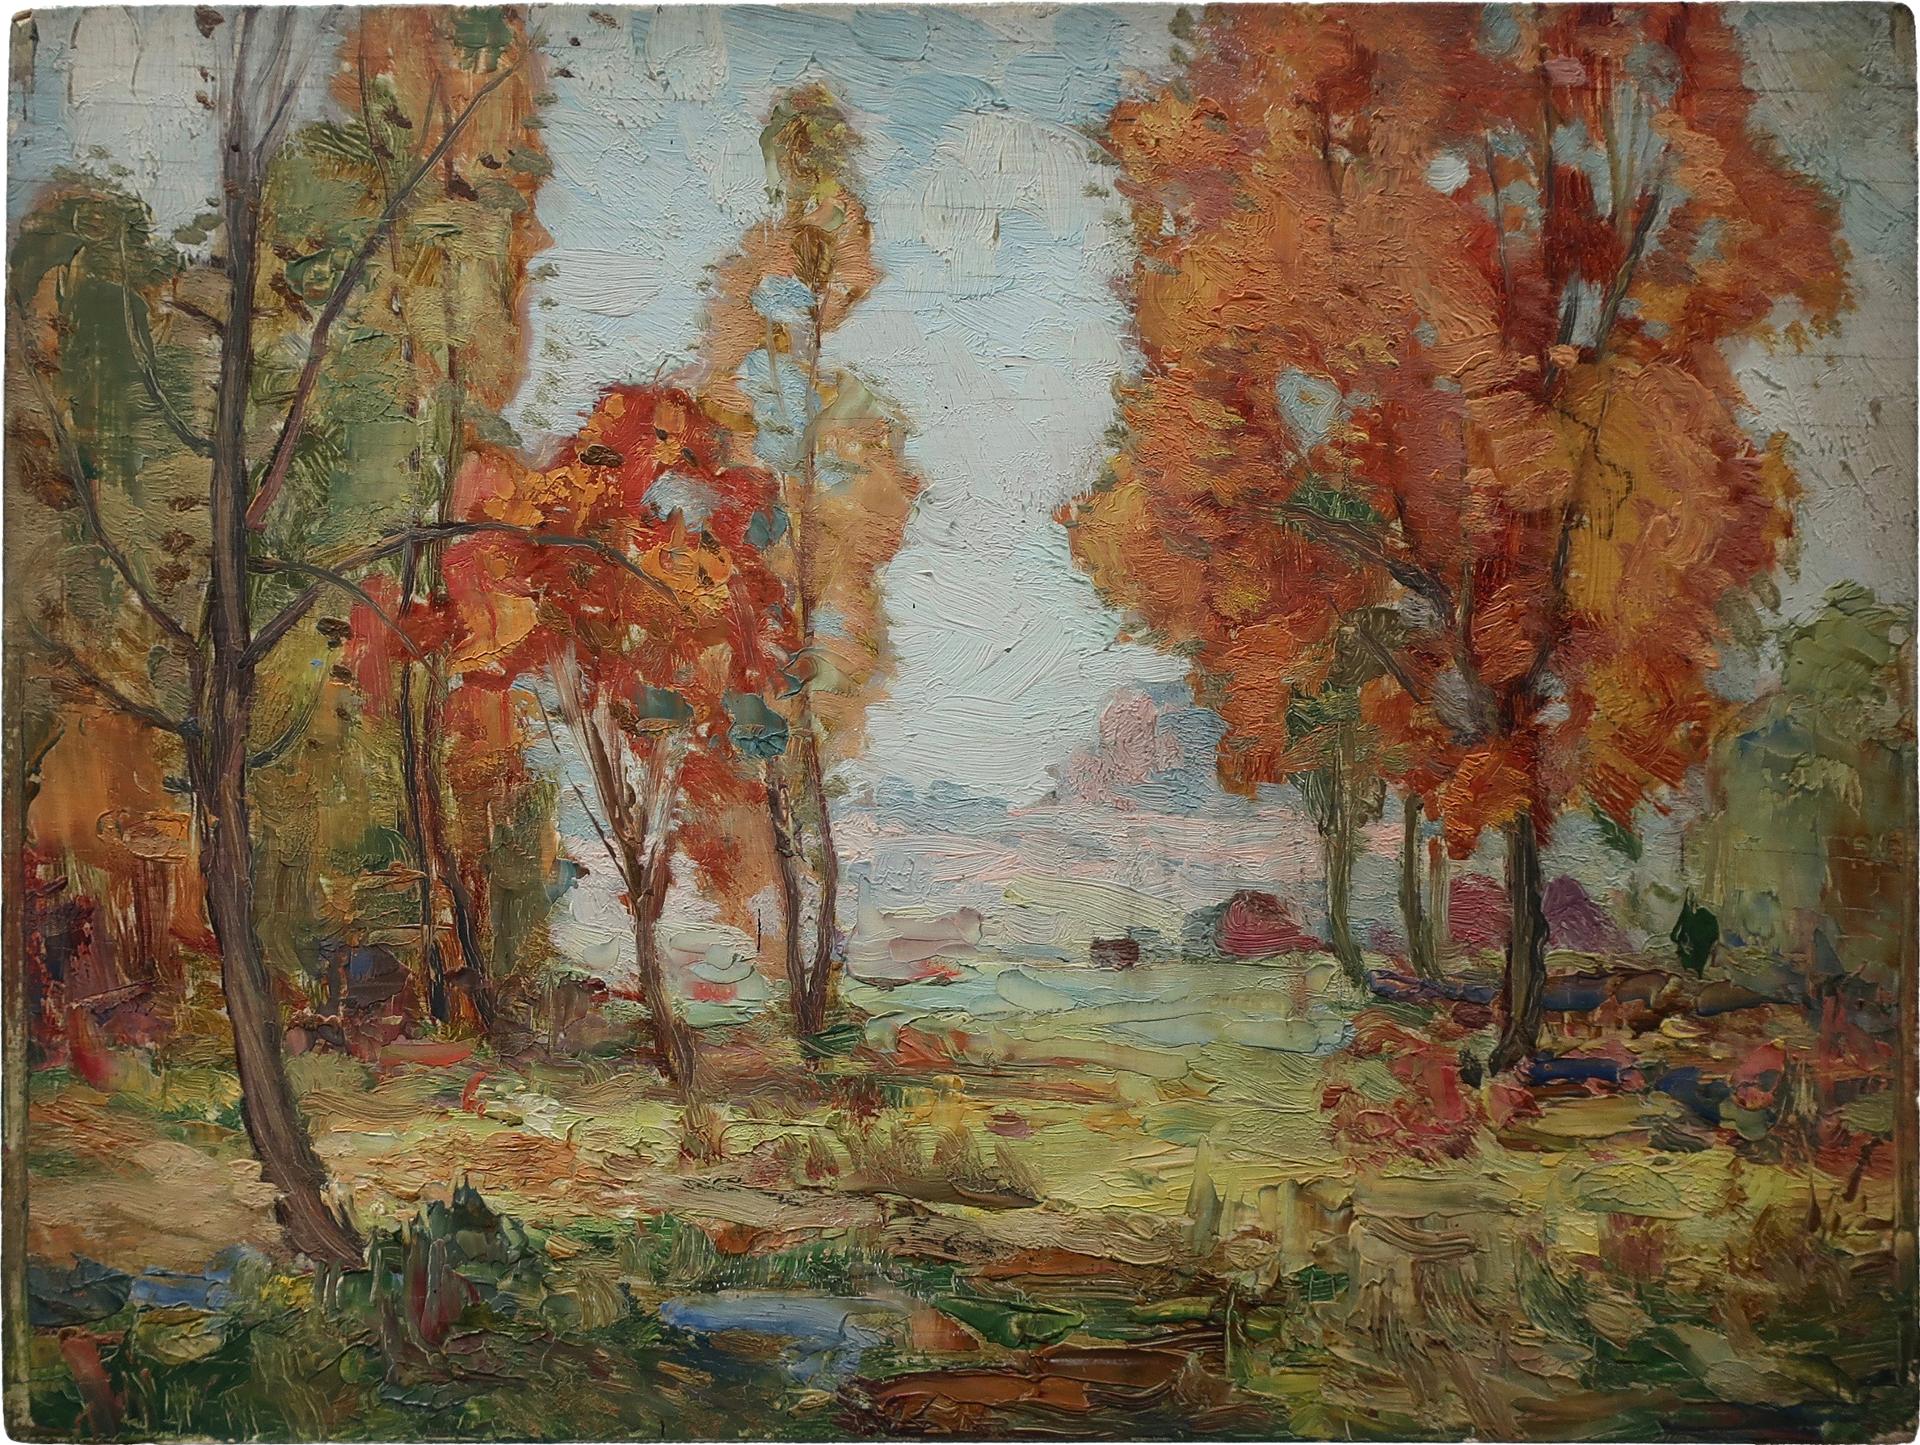 George Henry Griffin (1898-1974) - Untitled (Fall Landscape)